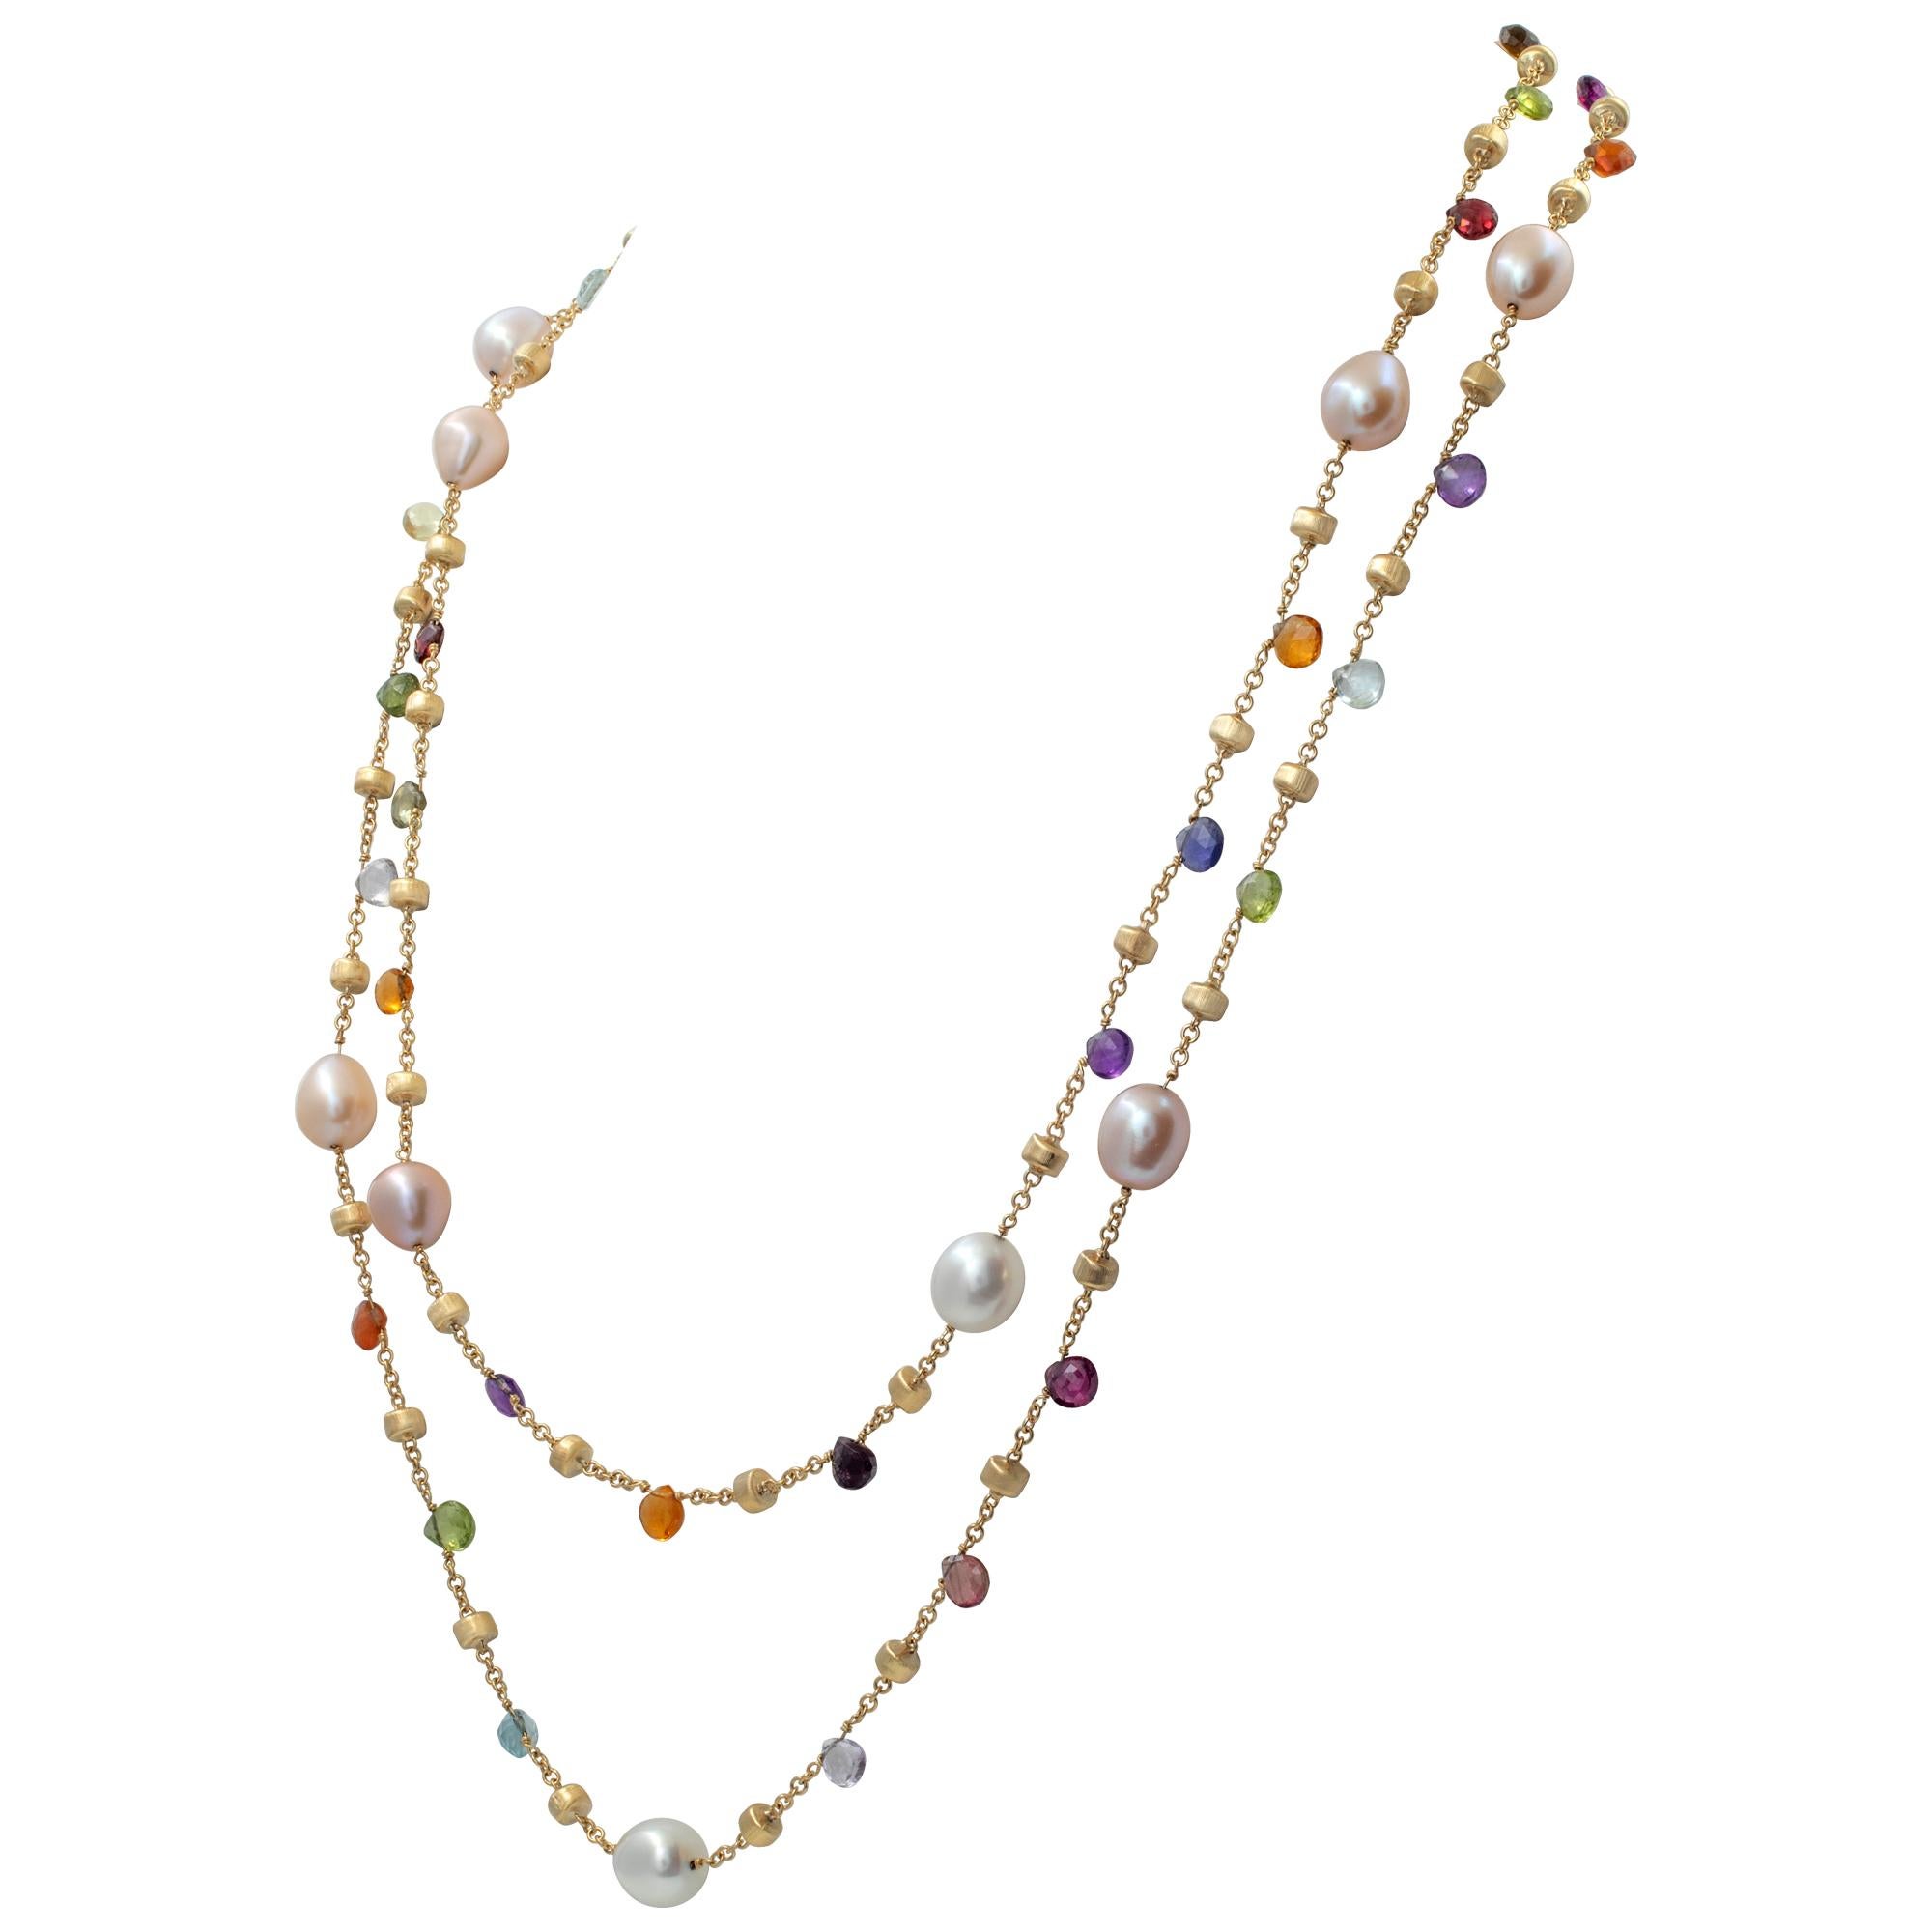 Marco Bicego 46 inches chain, necklace in 18k yellow gold, with twelve pink, white, golden brown oval fresh water pearls (8.00 to 9.00 mm), amethyst, citrine, peridot, tourmaline, topaz, iolite briolette beads and textured gold rondelle stations to